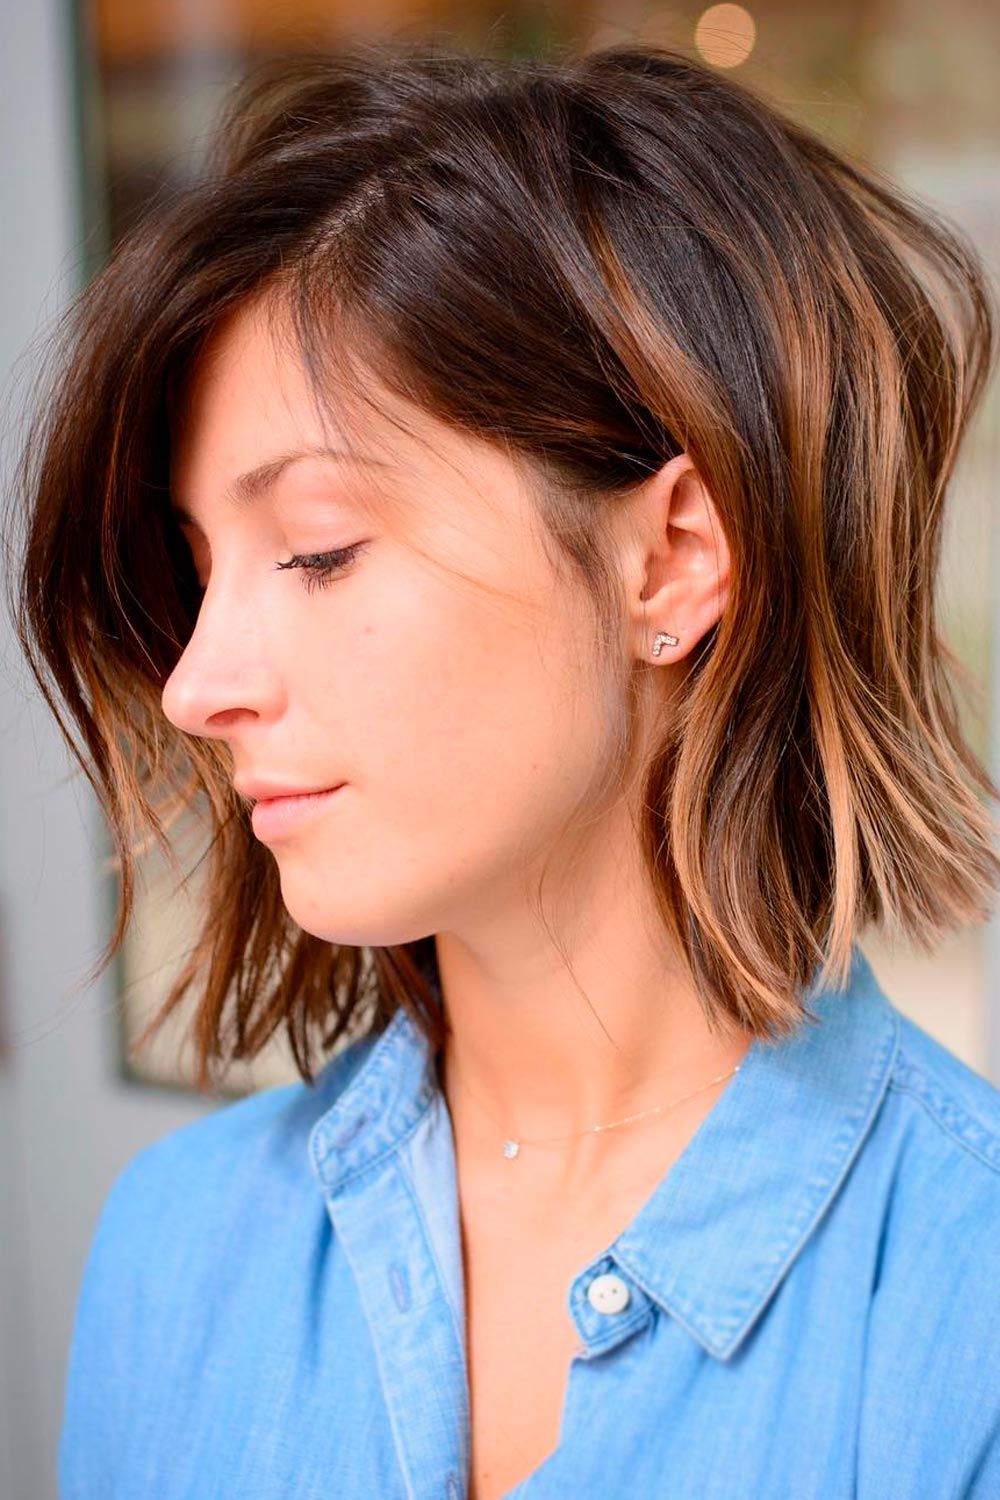 Short Hairstyles for Heart face 27 Heart shape face hairstyle female | Heart shaped face hairstyles female | Short Hairstyles for Heart Face Short Hairstyles for Heart Face Women